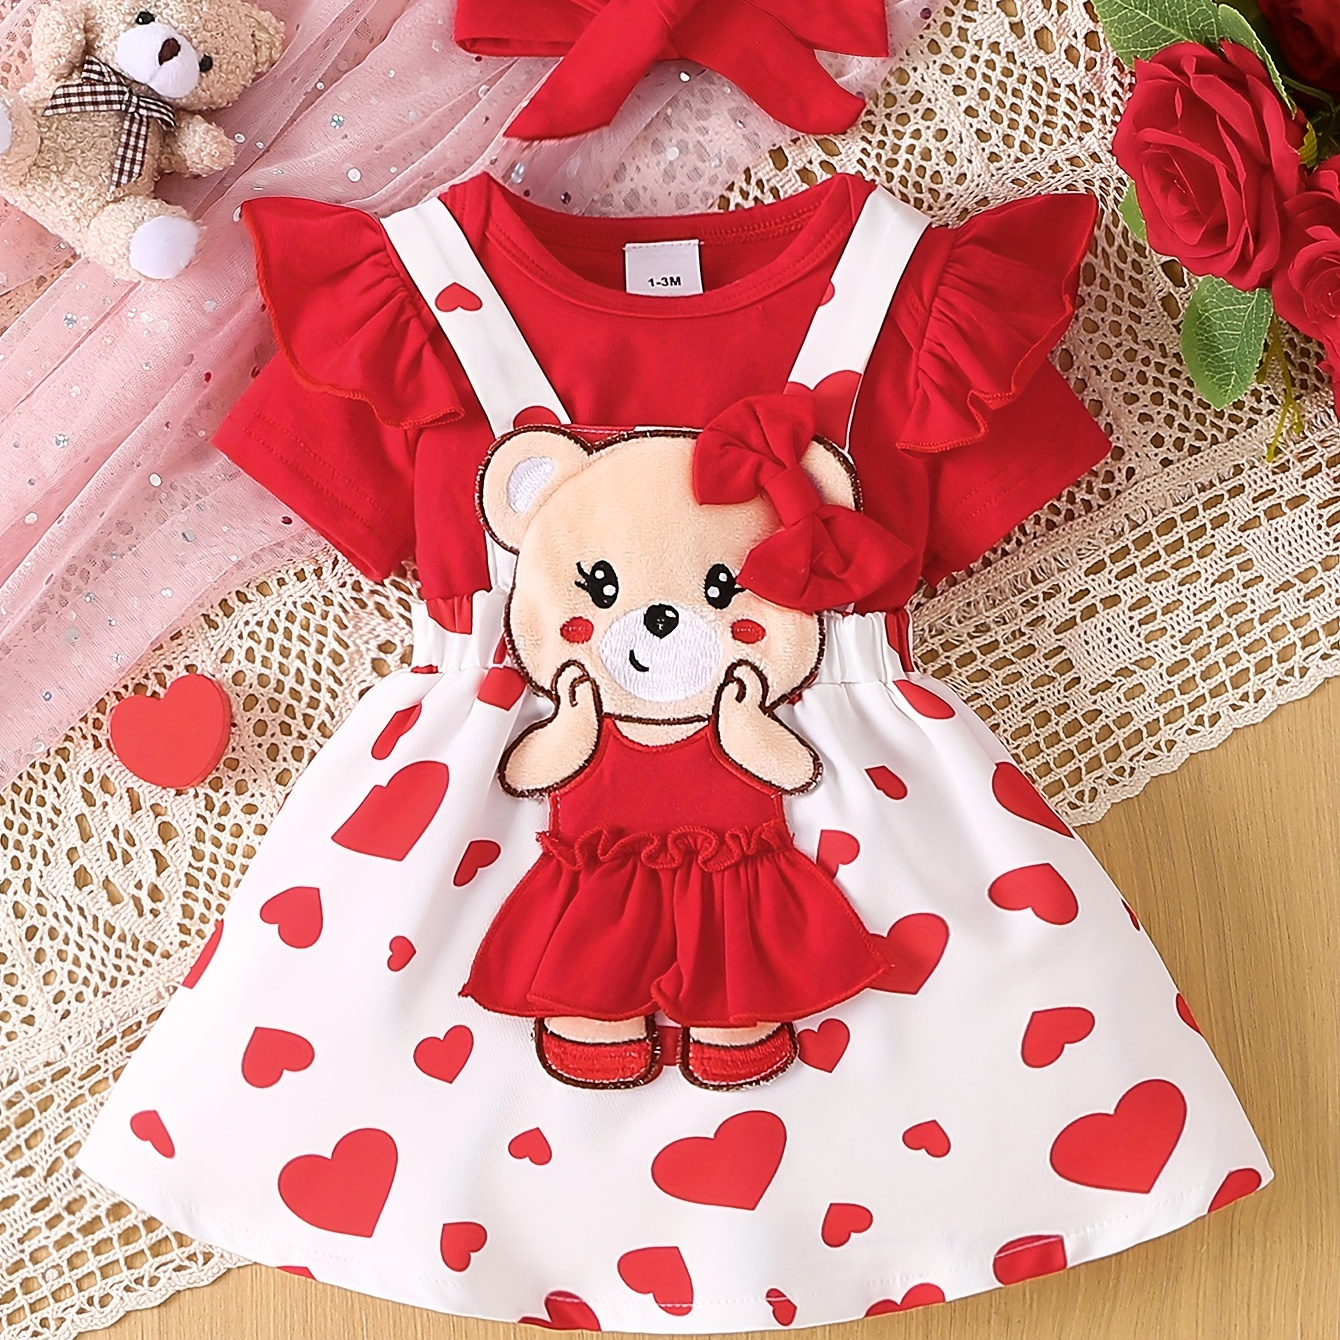 

Baby's Cute Bear Patchwork 2pcs Summer Outfit, Bodysuit & Suspender Overall Dress Set, Toddler & Infant Girl's Clothes For Daily Wear/holiday/party